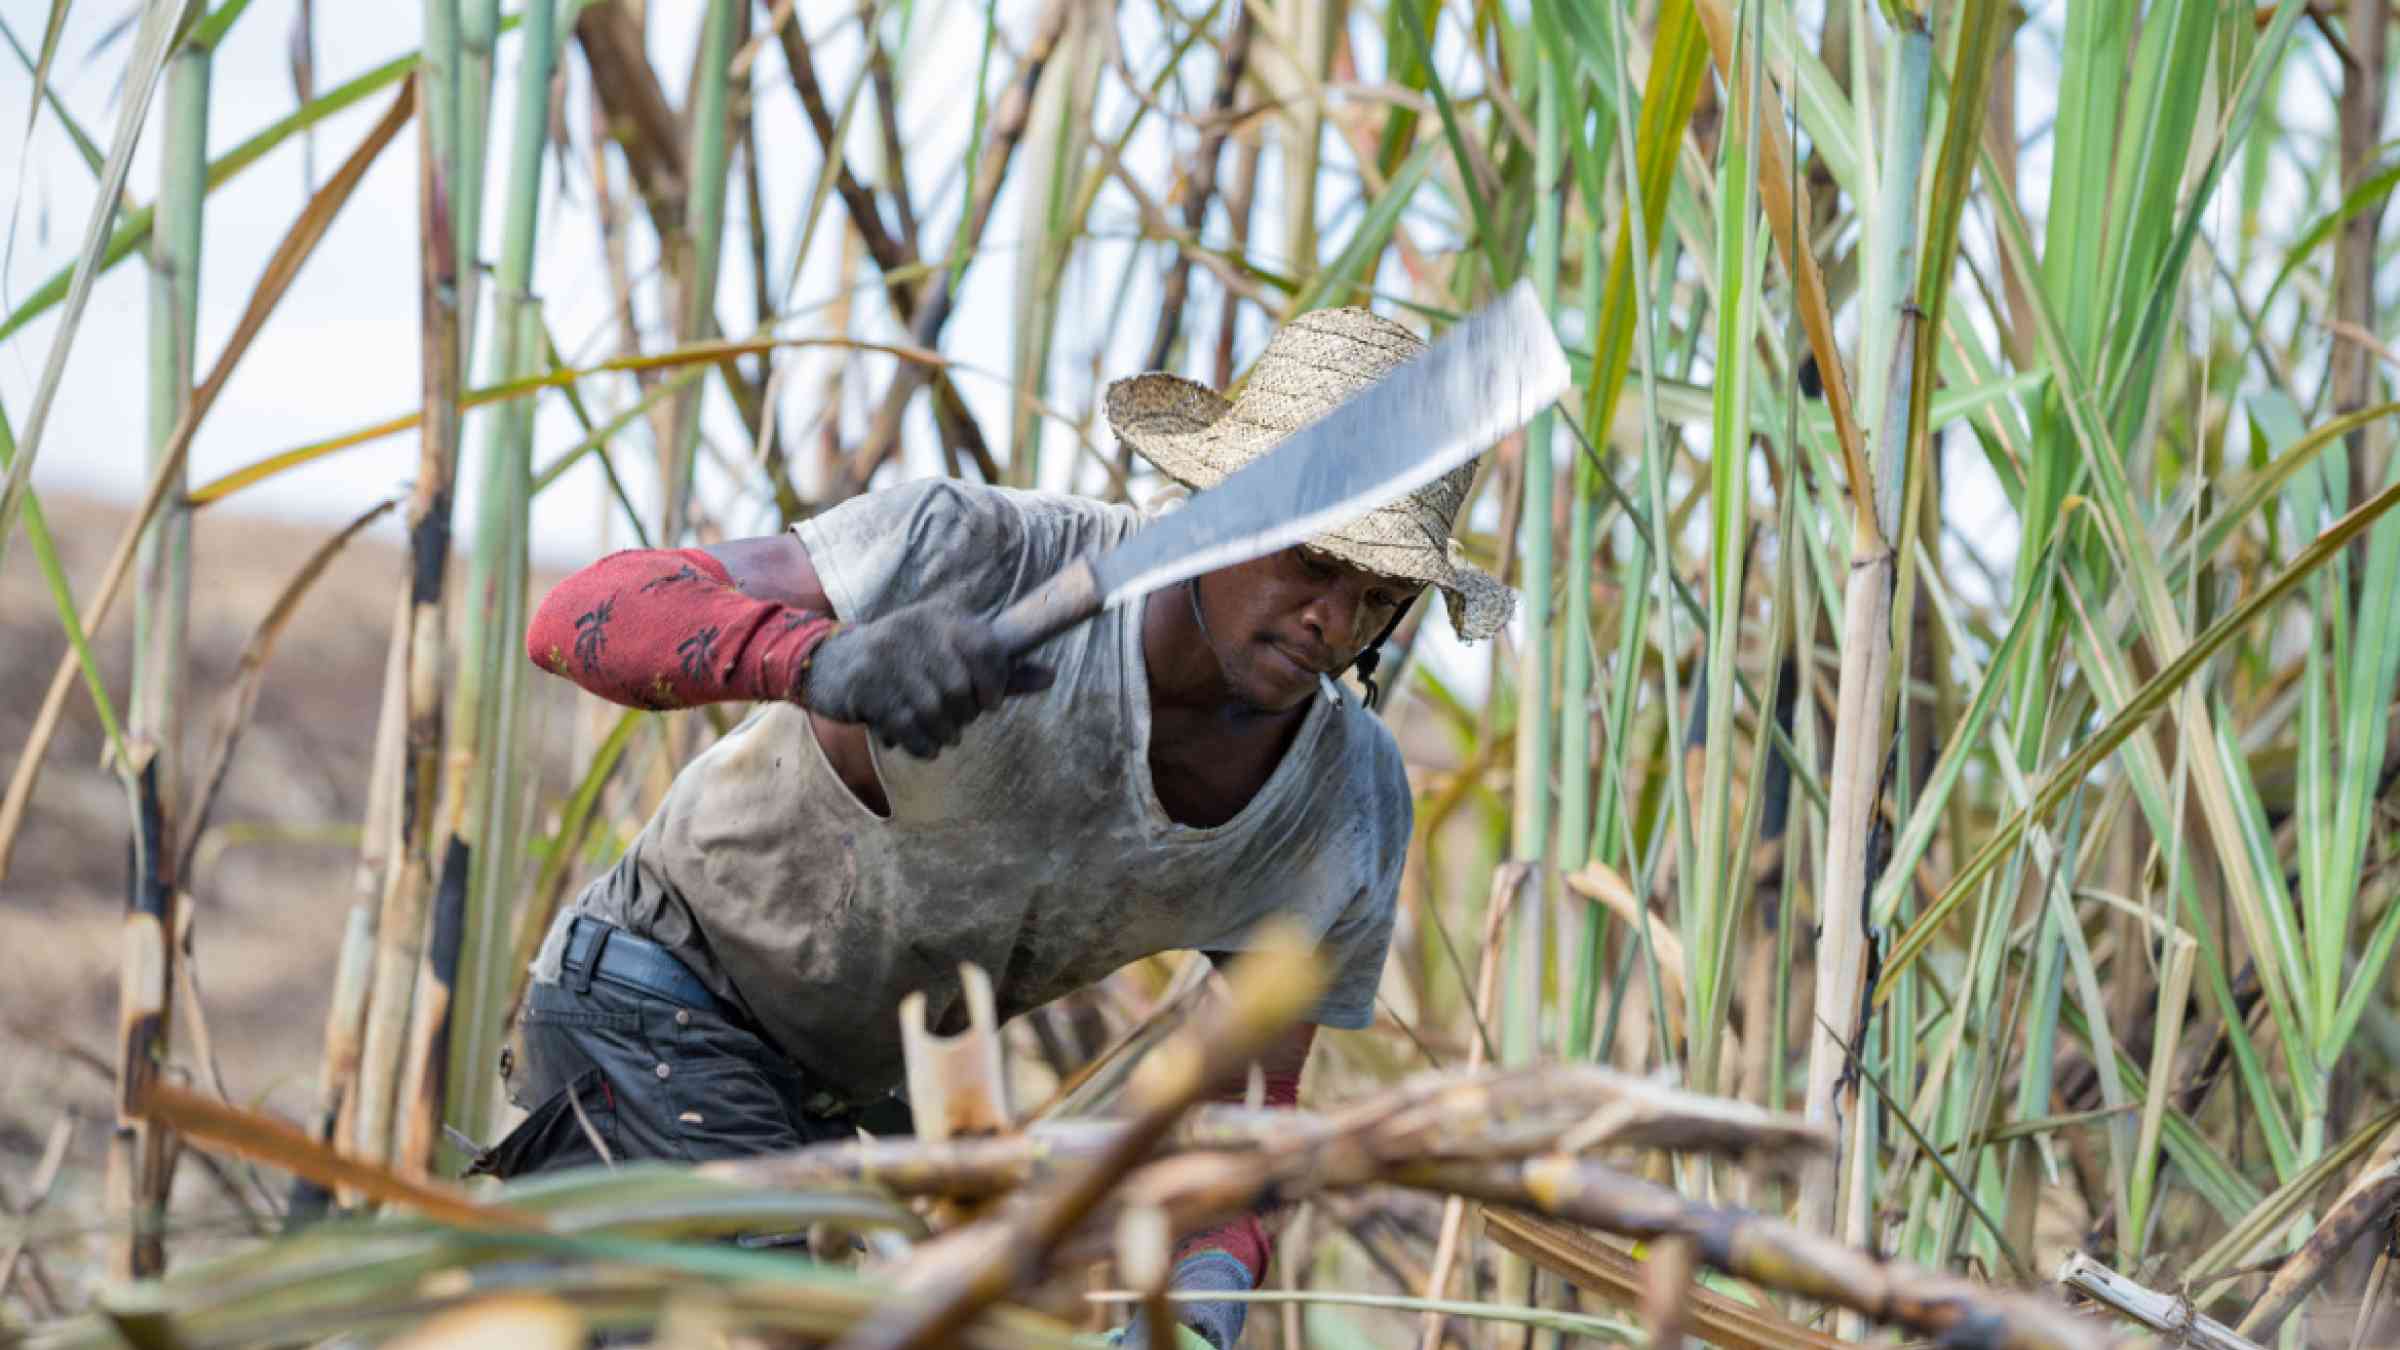 A worker labouring in the cane fields to harvest sugar cane at Siloah, St. Elizabeth, Jamaica